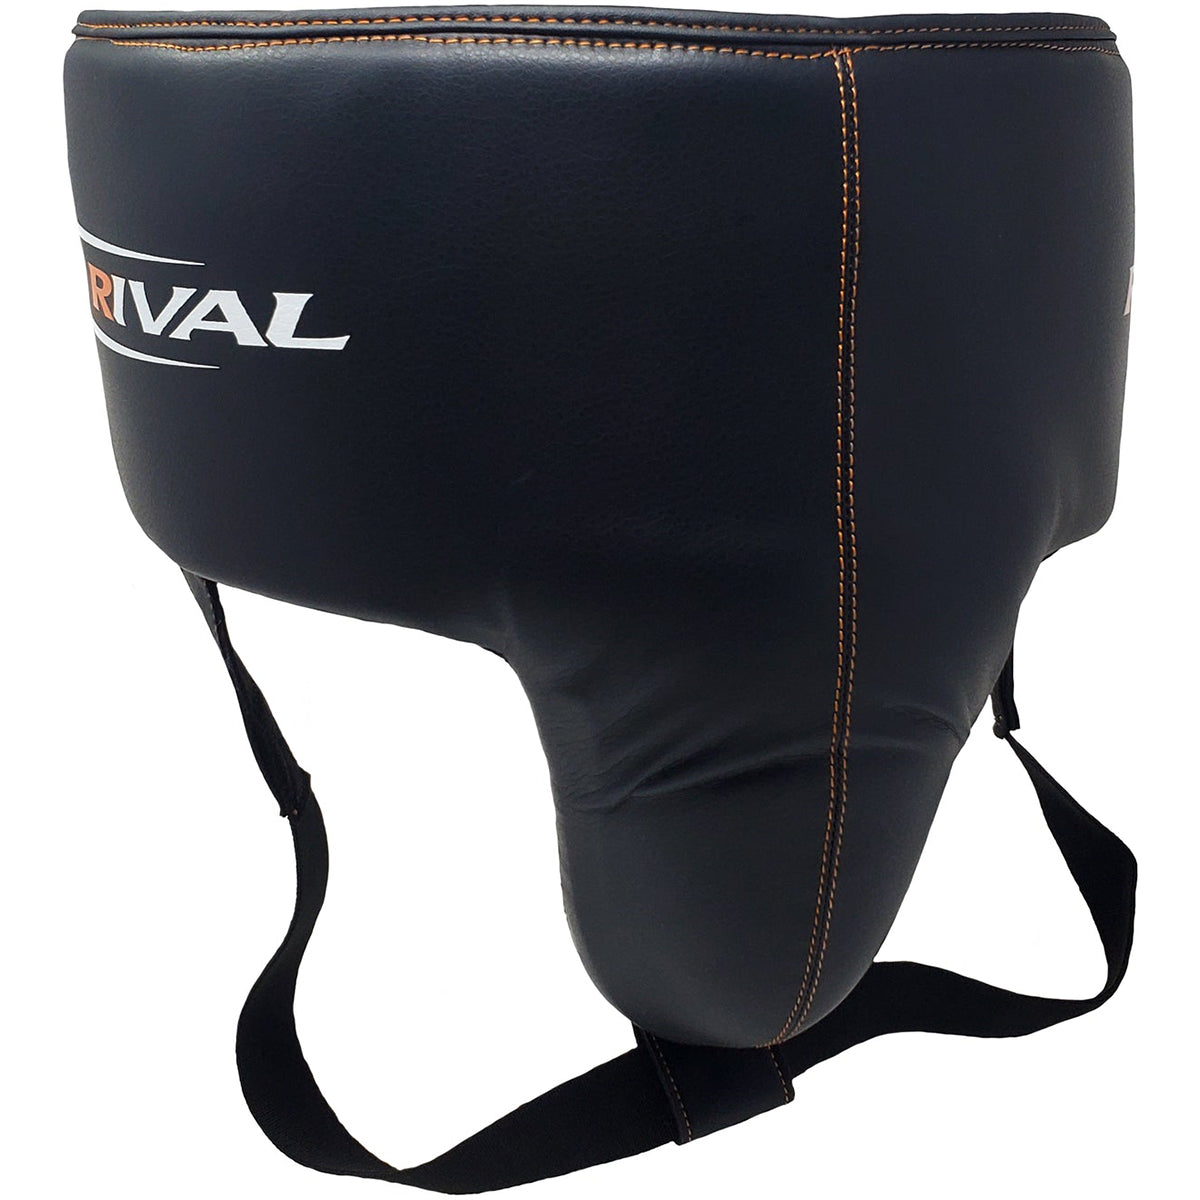 RIVAL Boxing RNFL60 Workout Training 180 No-Foul Groin Protector 2.0 - Black RIVAL